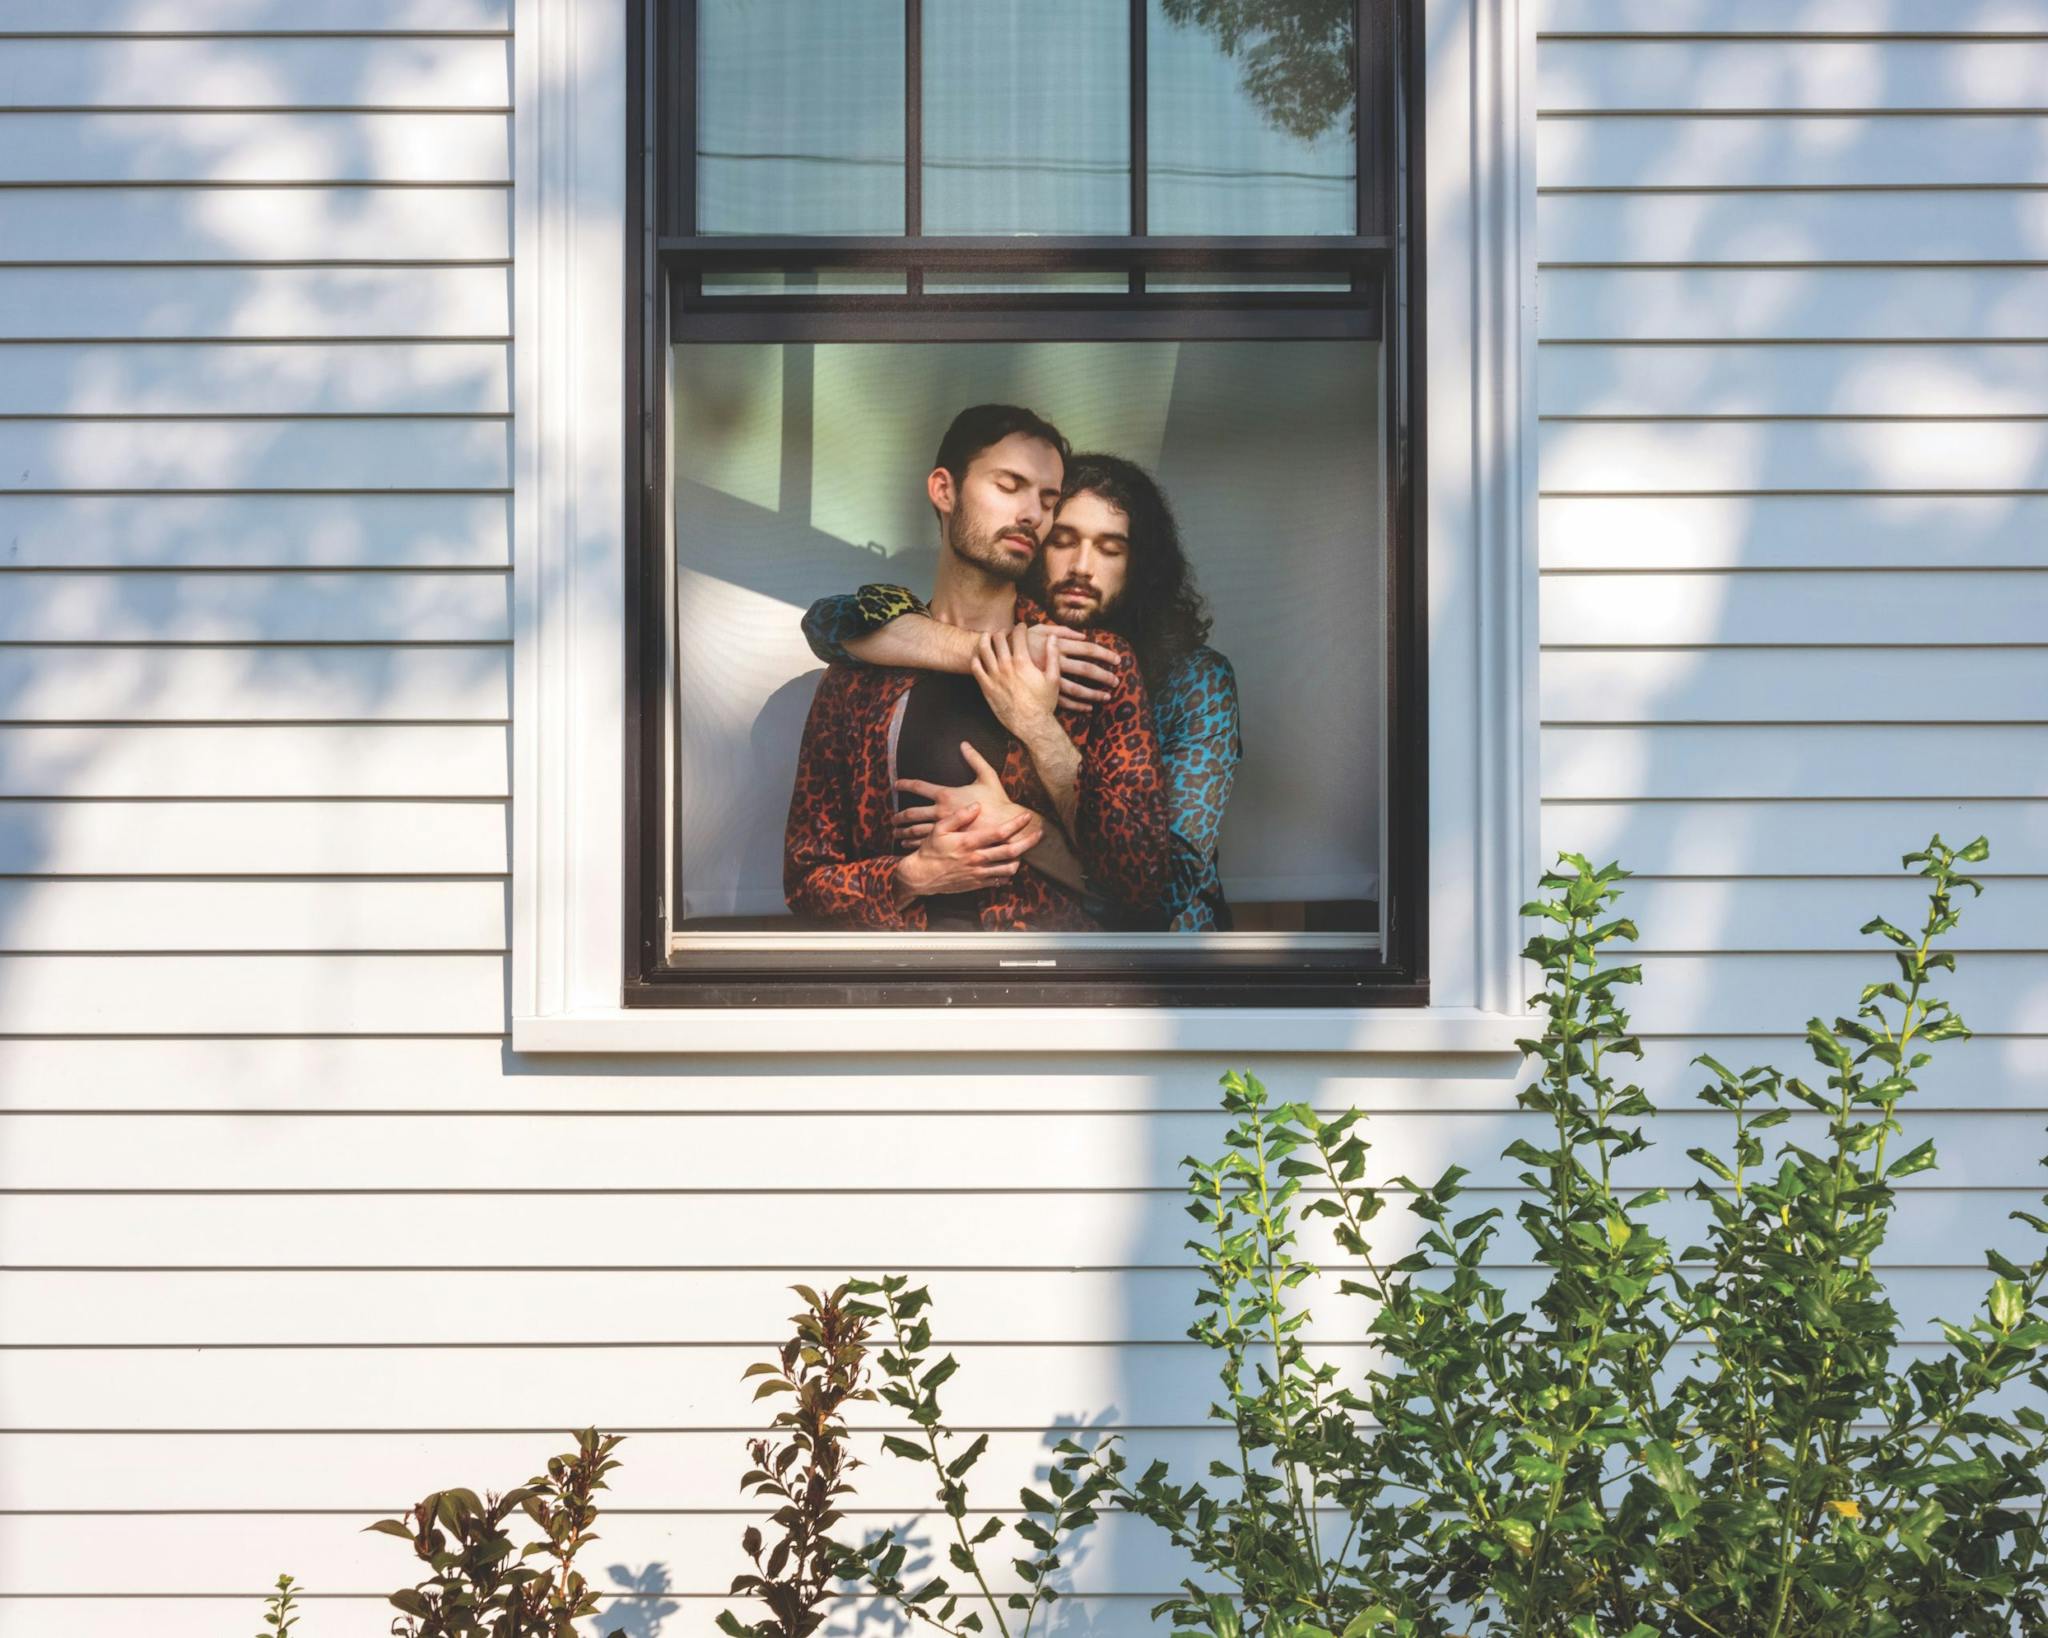 A couple named Cam and Jared pictured in the window of a house, a green plant appearing below.